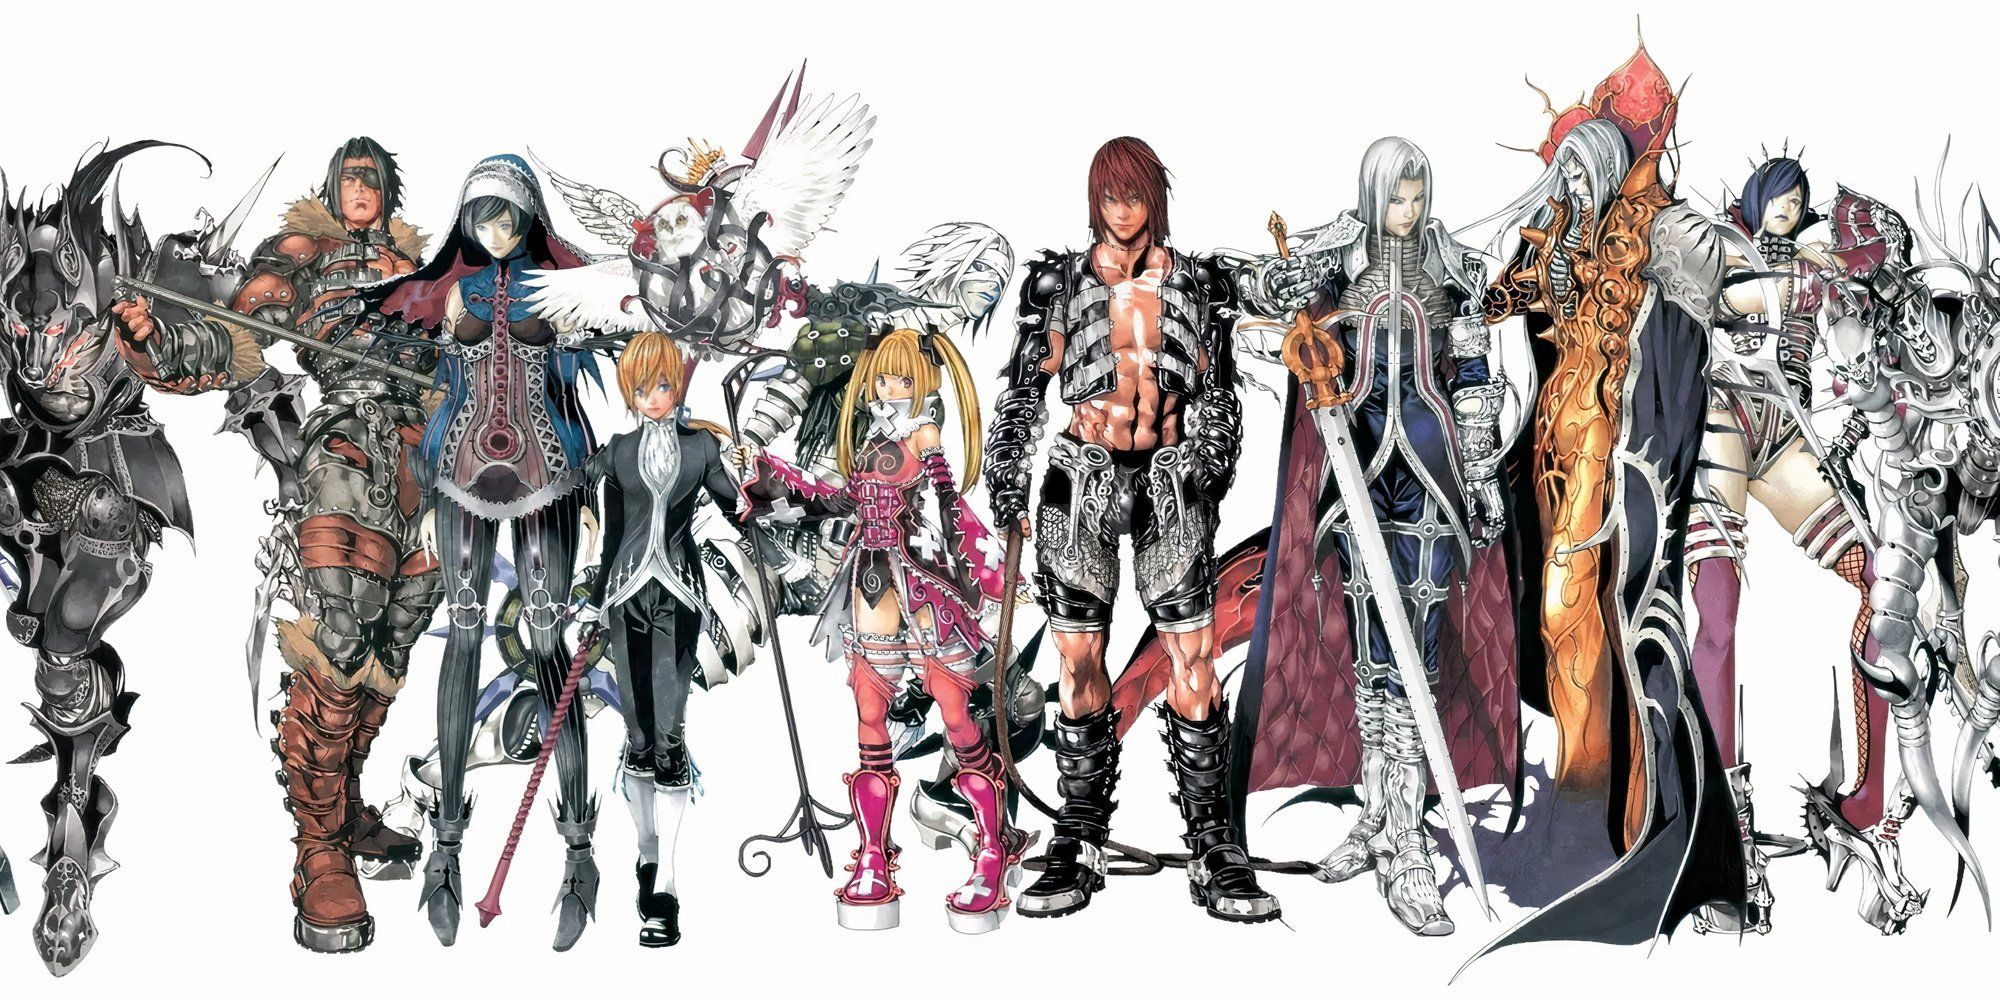 Promo art featuring characters in Castlevania Judgement